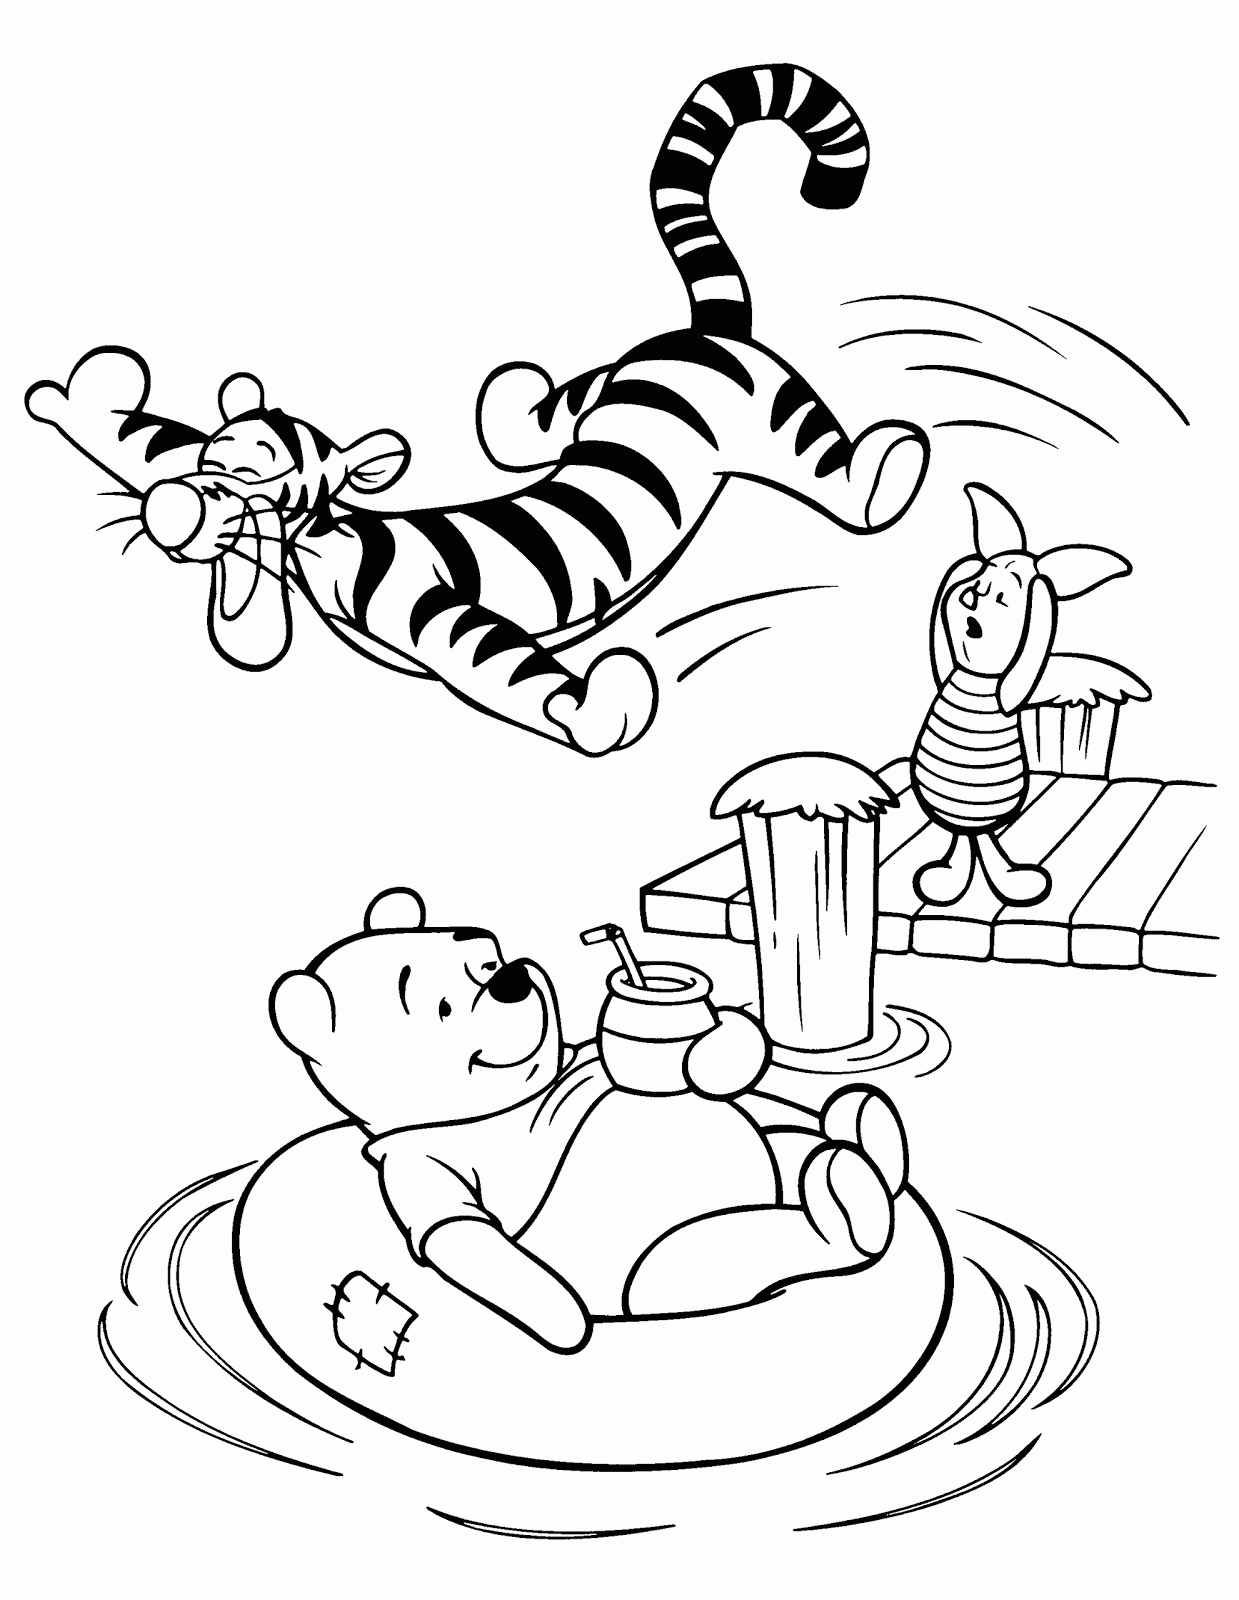 Download Disney Coloring Pages: 7 Walt Disney Winnie The Pooh and ...